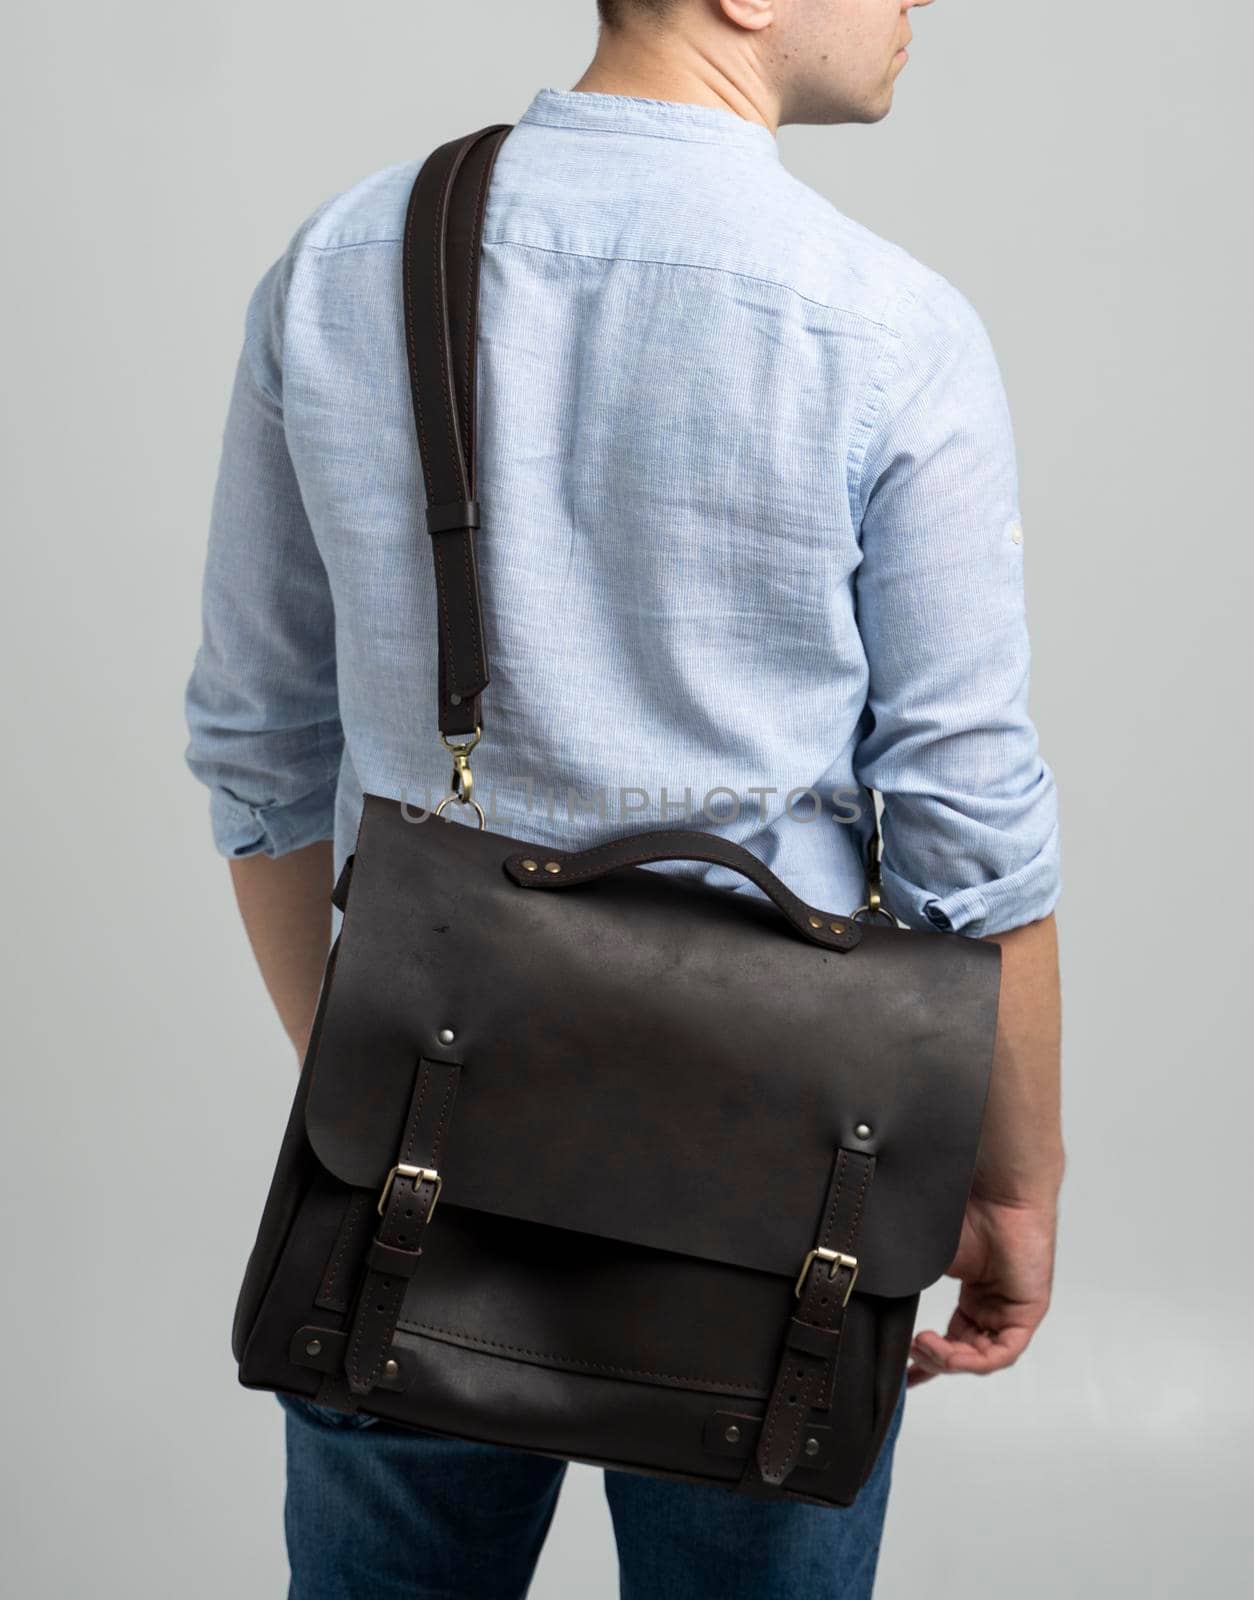 Brown men's shoulder leather bag for a documents and laptop on the shoulders of a man in a blue shirt and jeans with a white background. Satchel, mens leather handmade briefcase. by vovsht